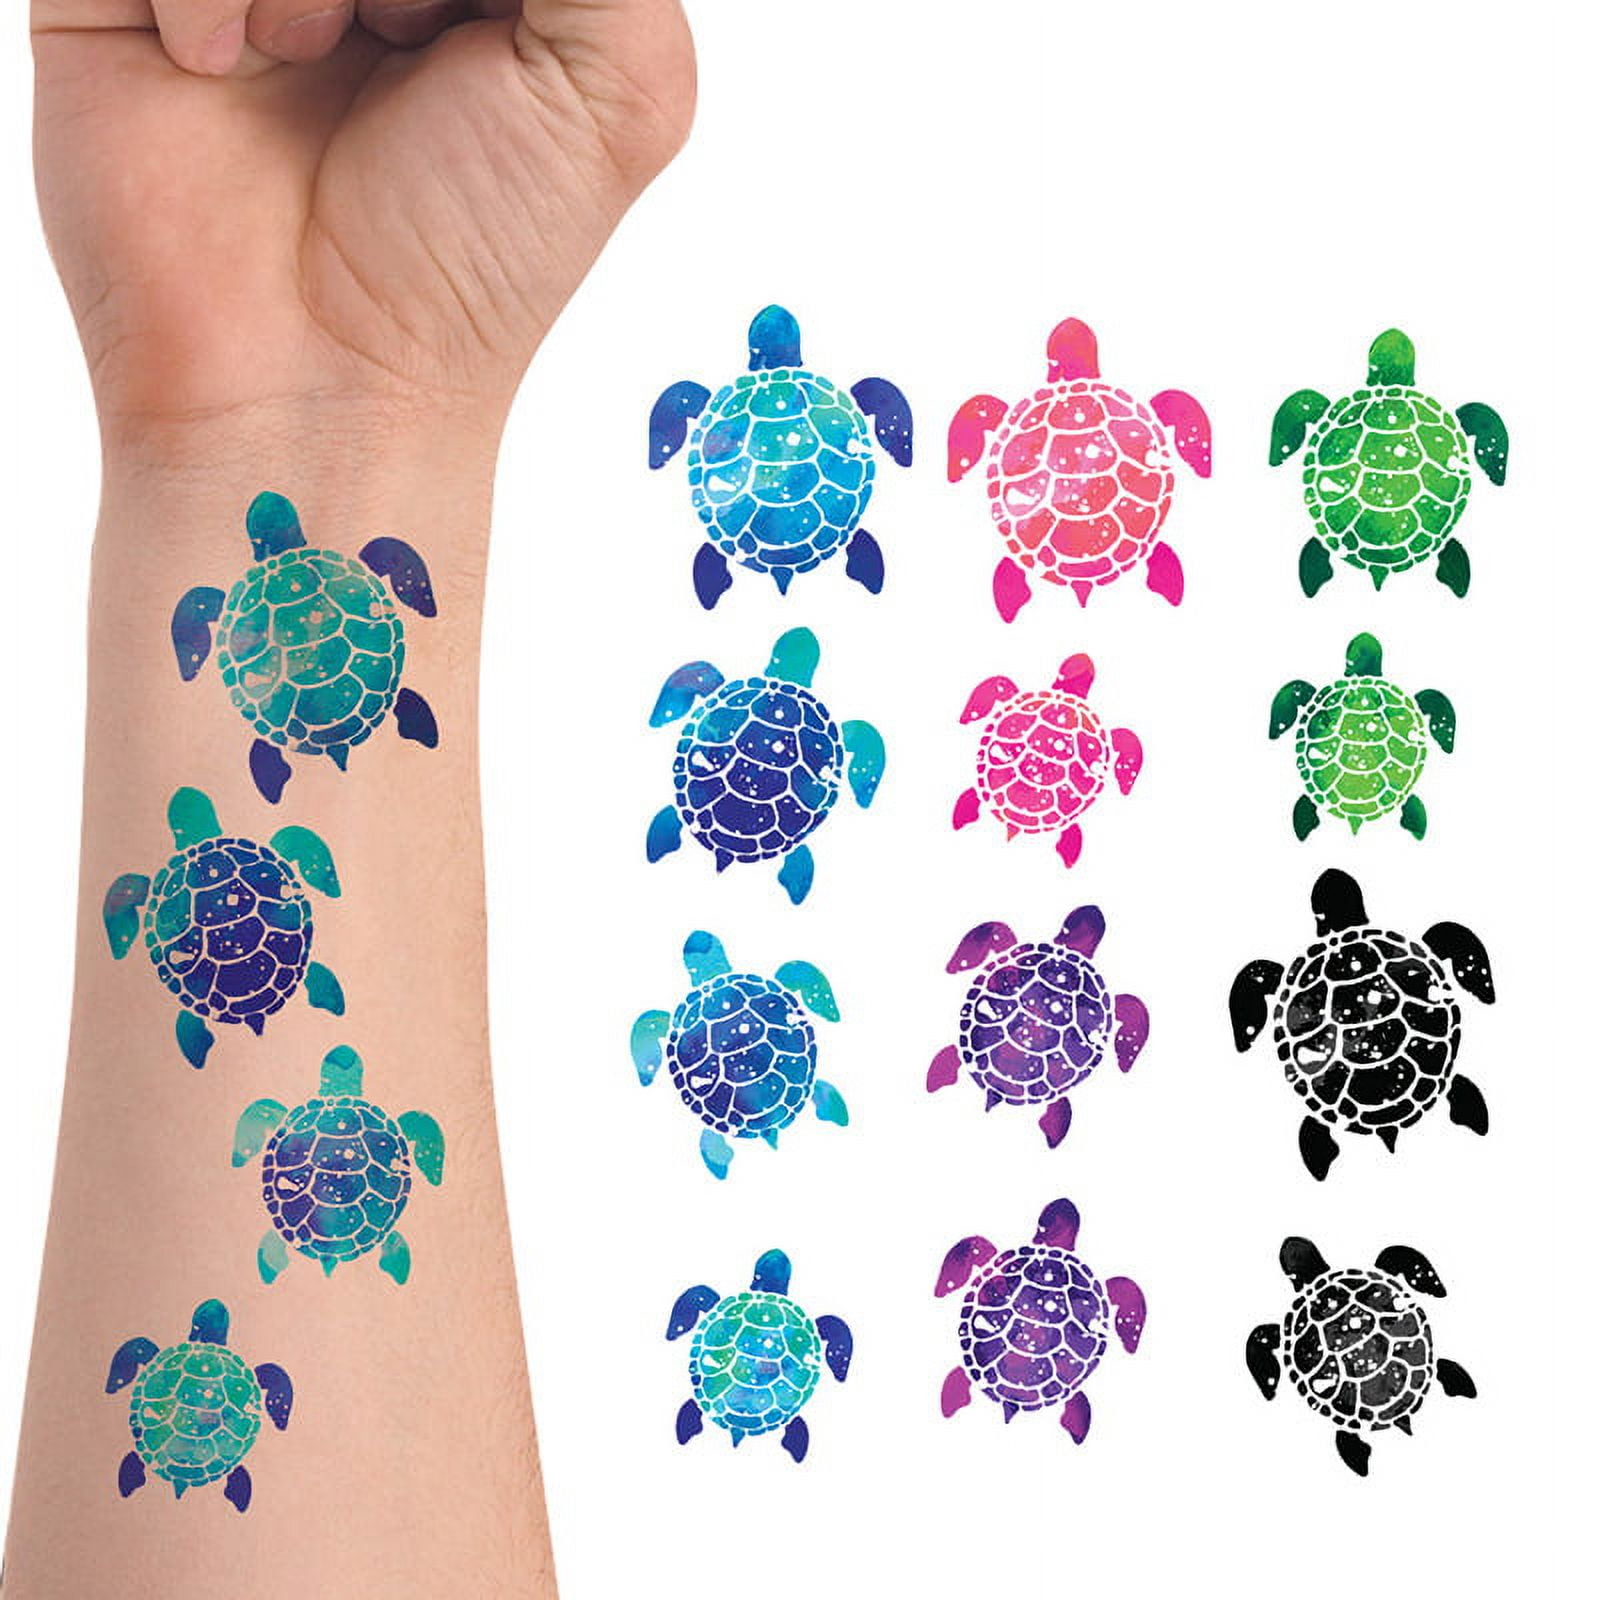 Temporary Tattoos Full Back Temporary Tattoo Flower Grass Fish Art Fake Tattoo  Stylish Large Body Tattoo For Men Women Couple For Boys Girls Lover 230621  From 9,75 € | DHgate